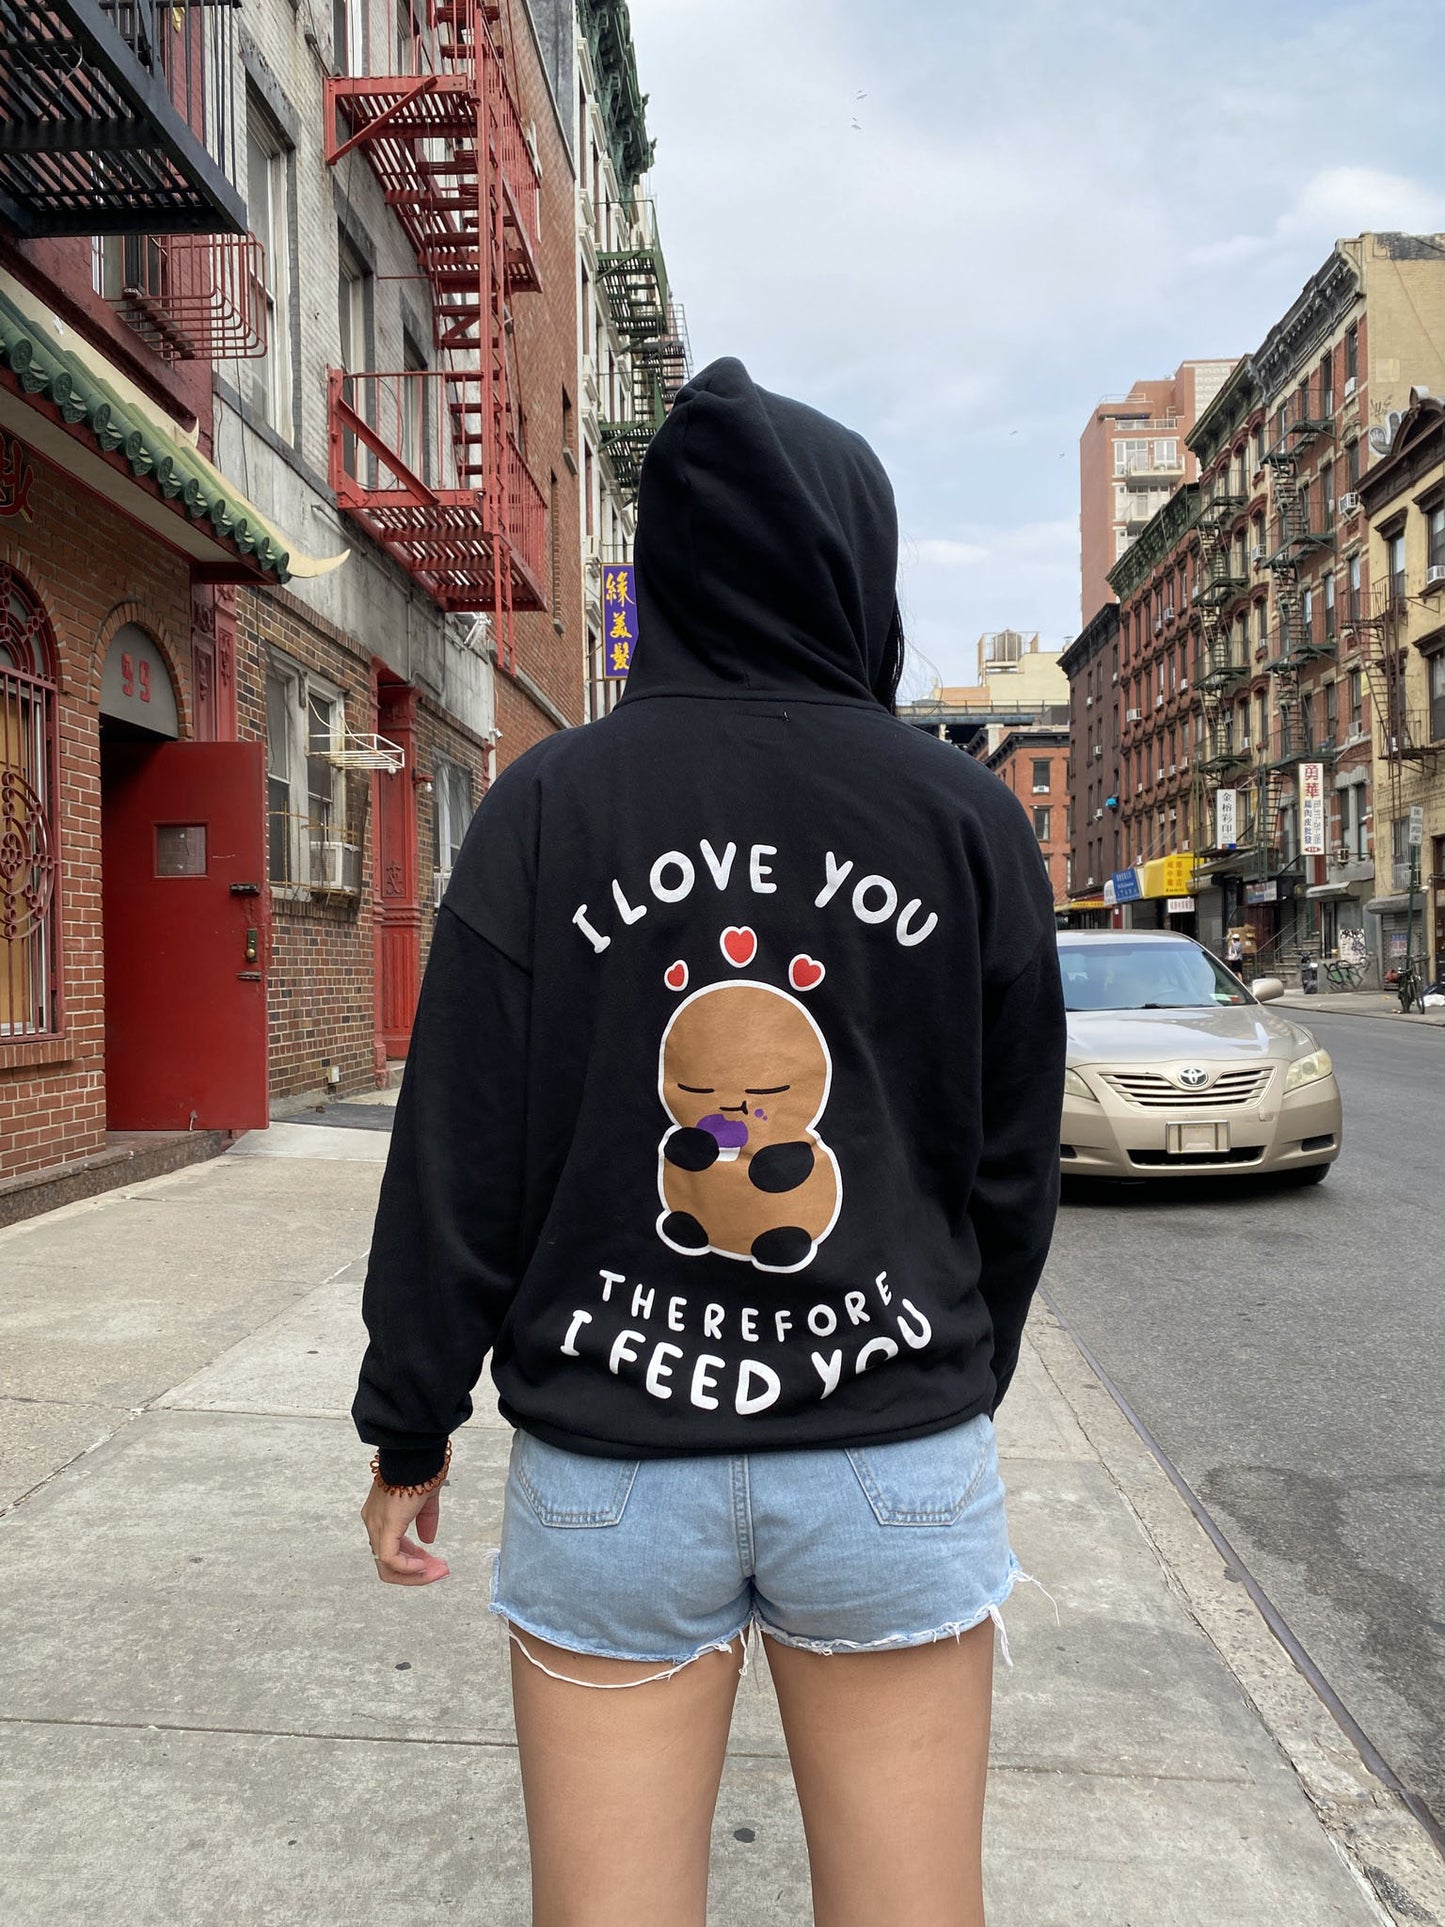 The "I Love You, Therefore I Feed You" Pullover Hoodie!